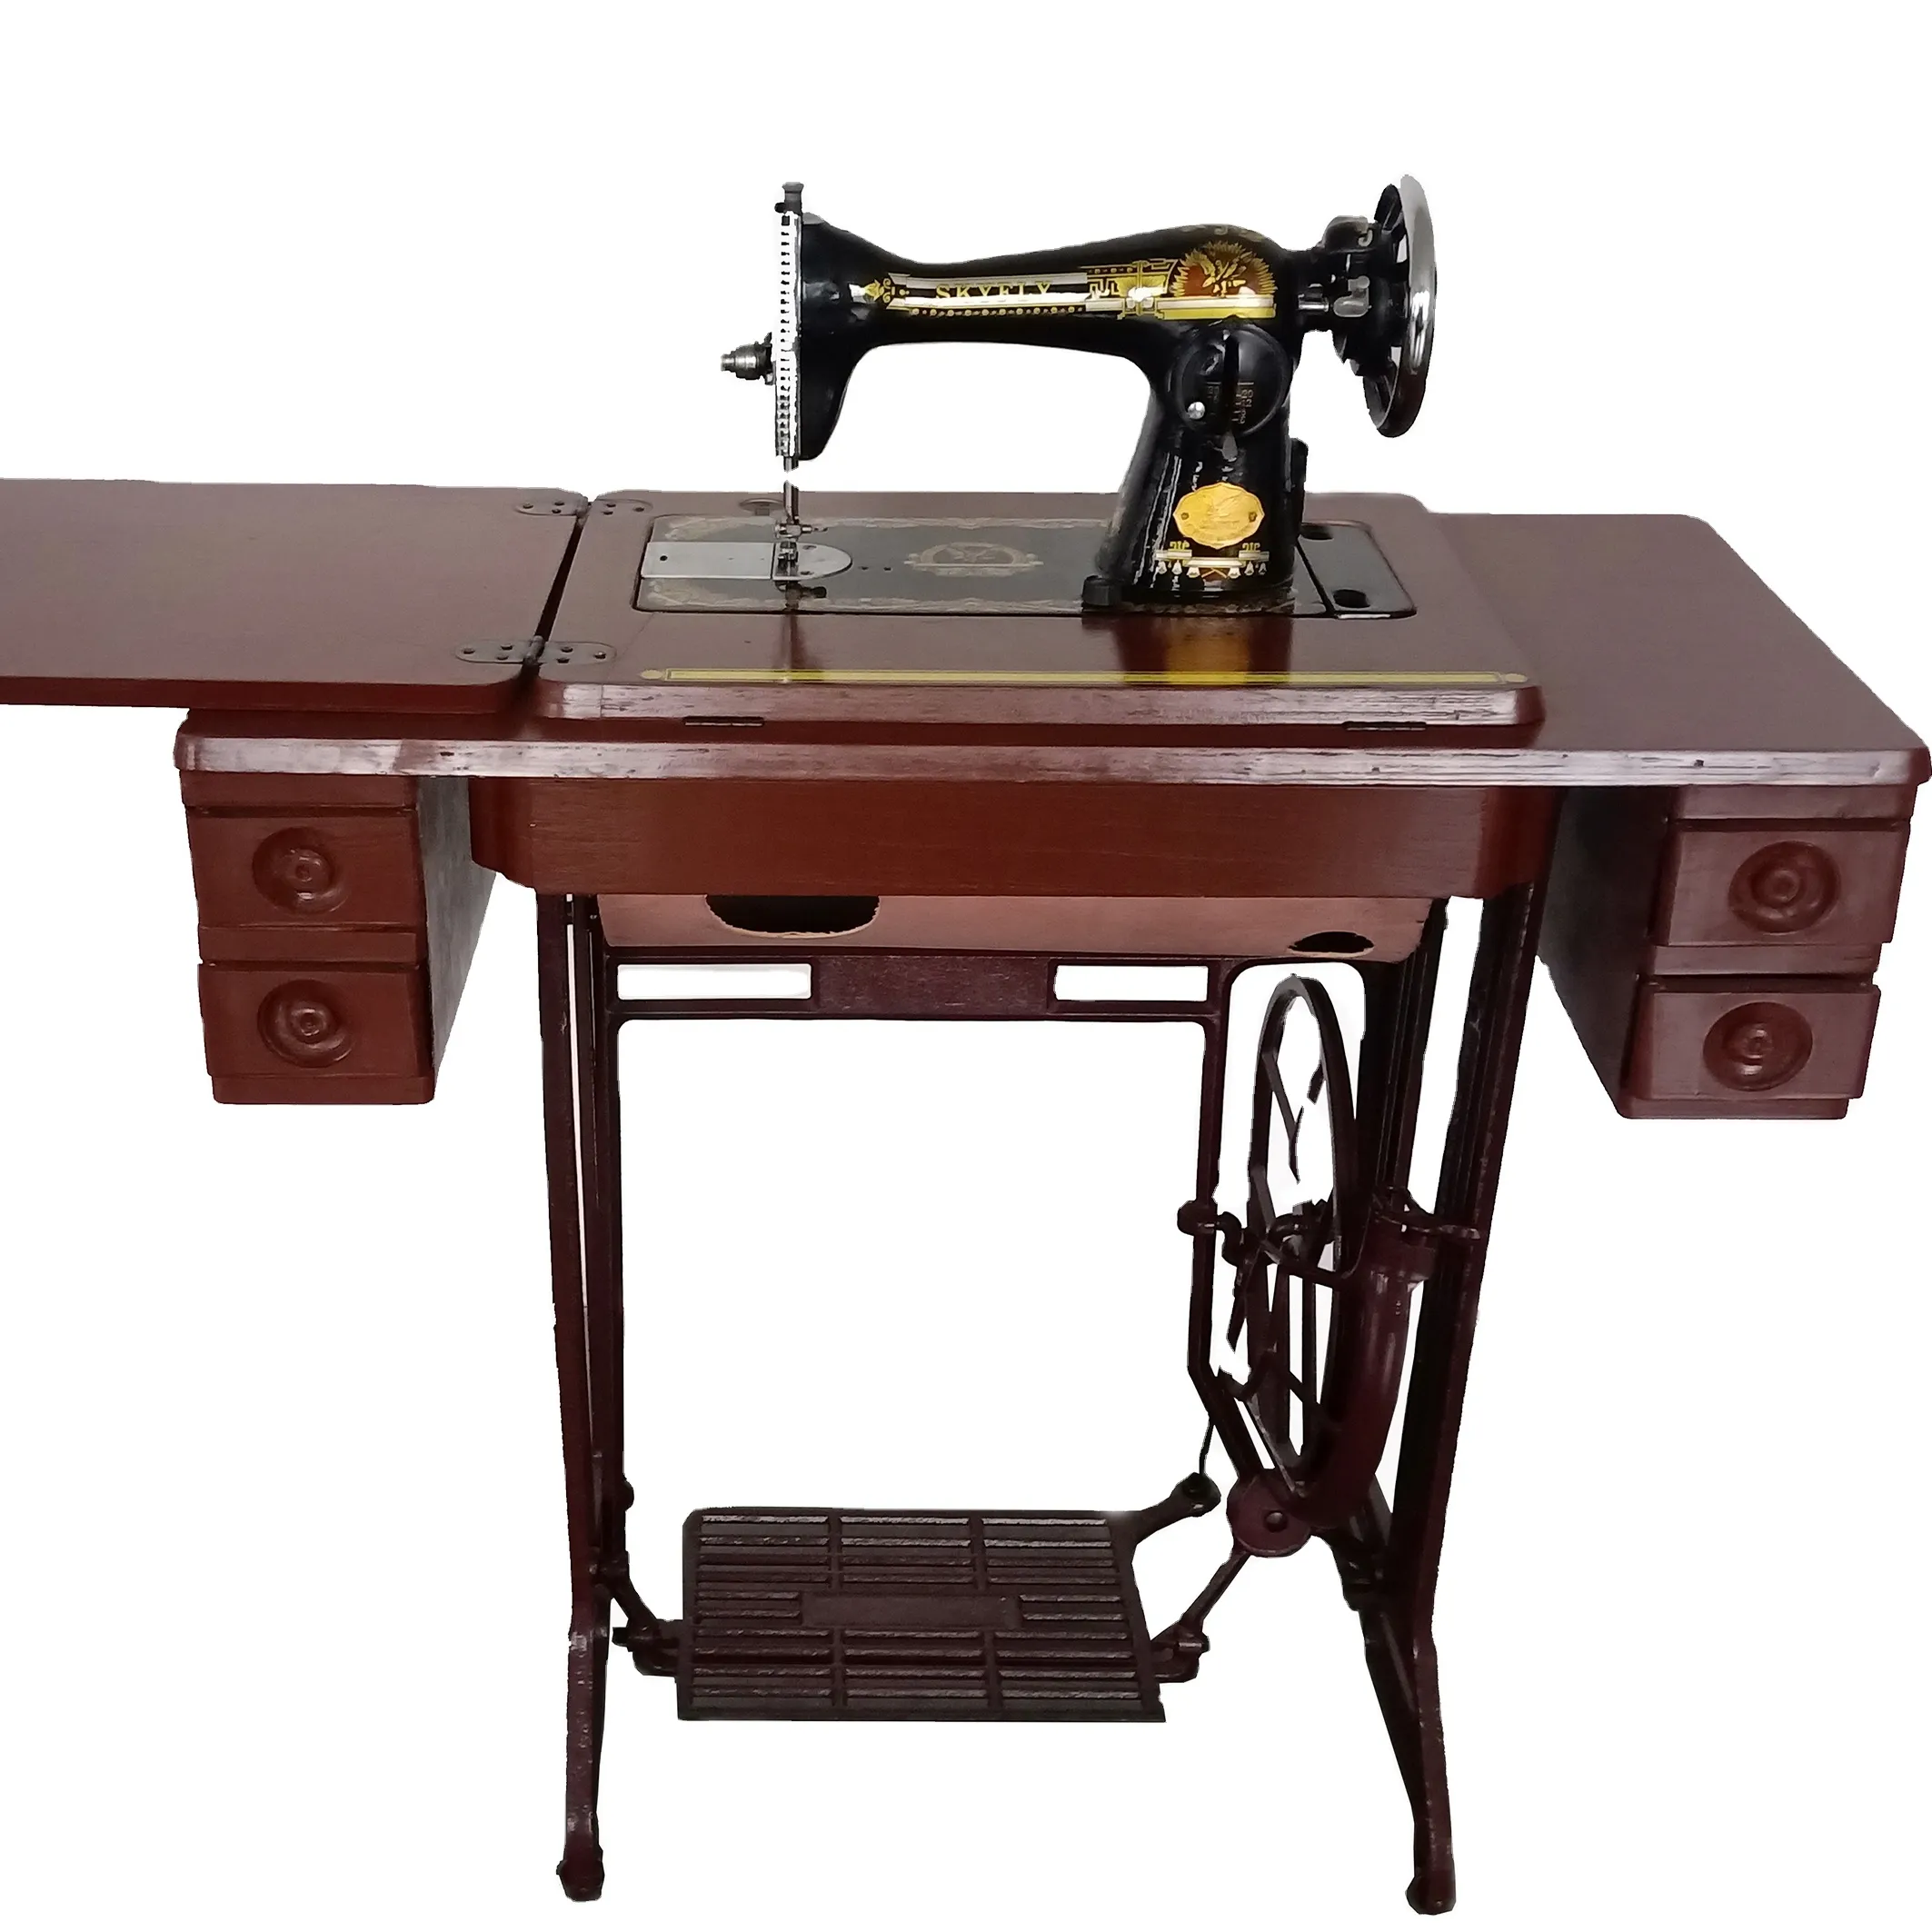 A Complete Set JA2-1/JA2-2 Household Sewing Machine with 5-drawer Table and Stand